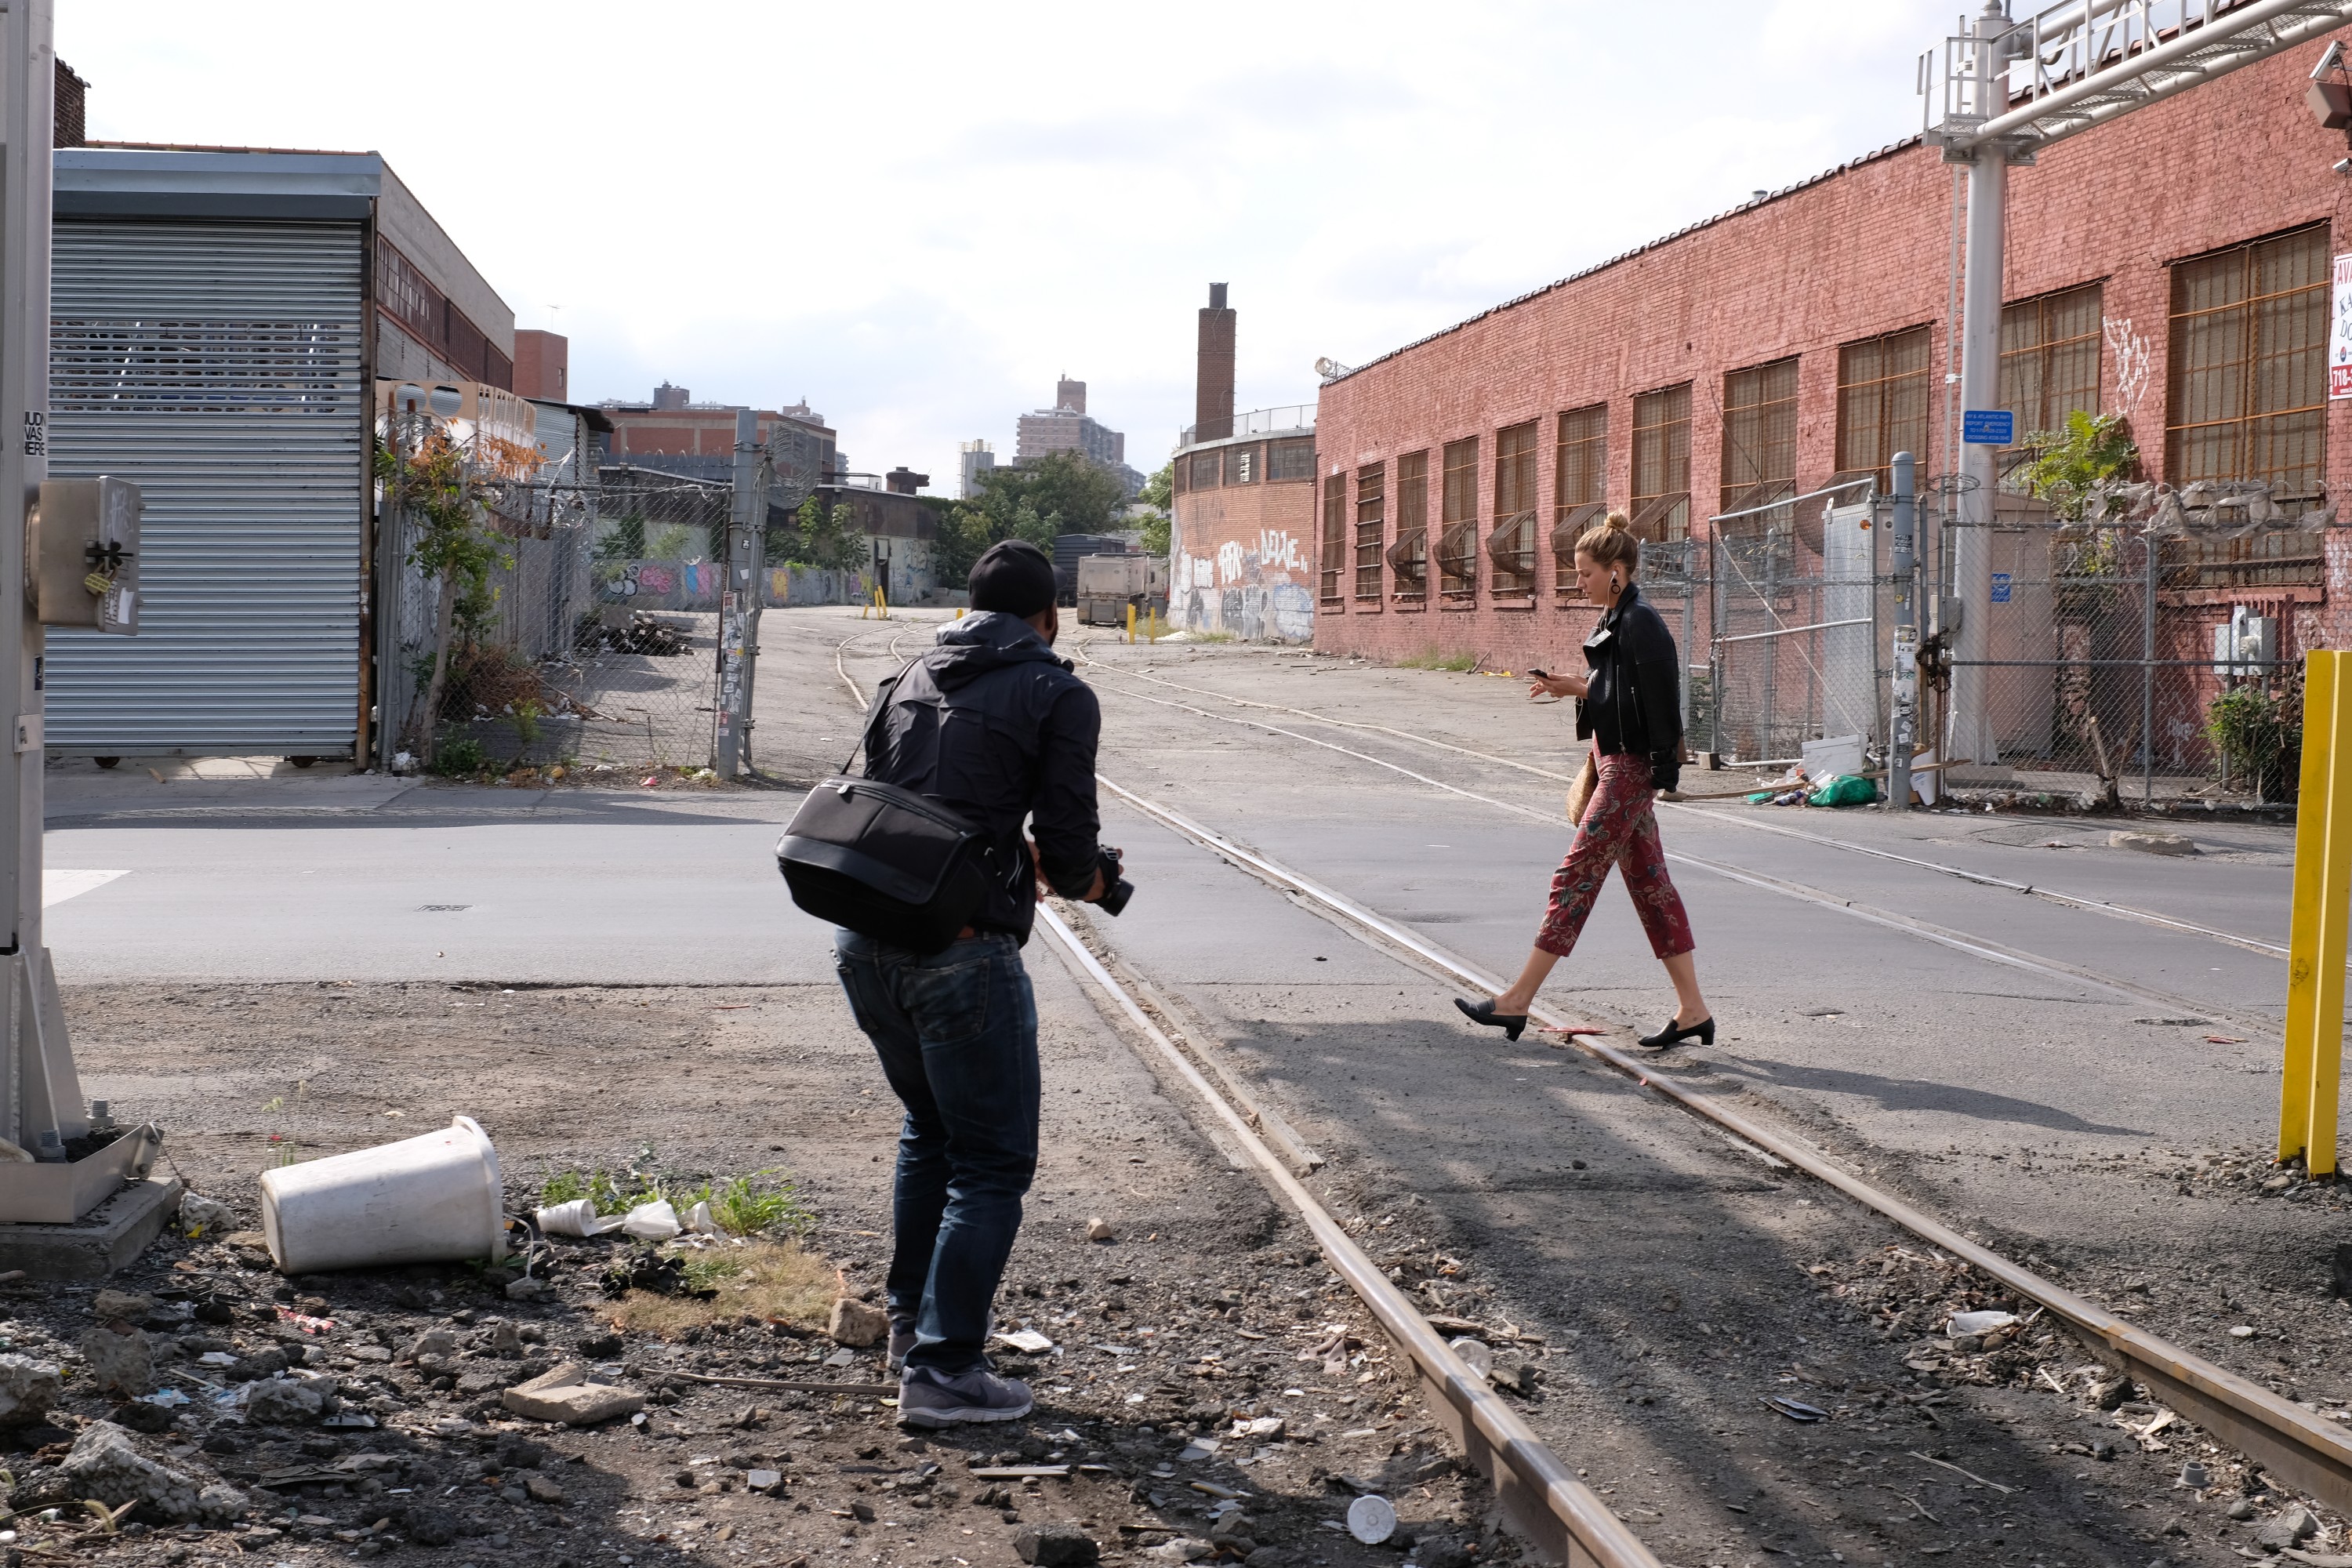 street photographer and woman walkng by train tracks